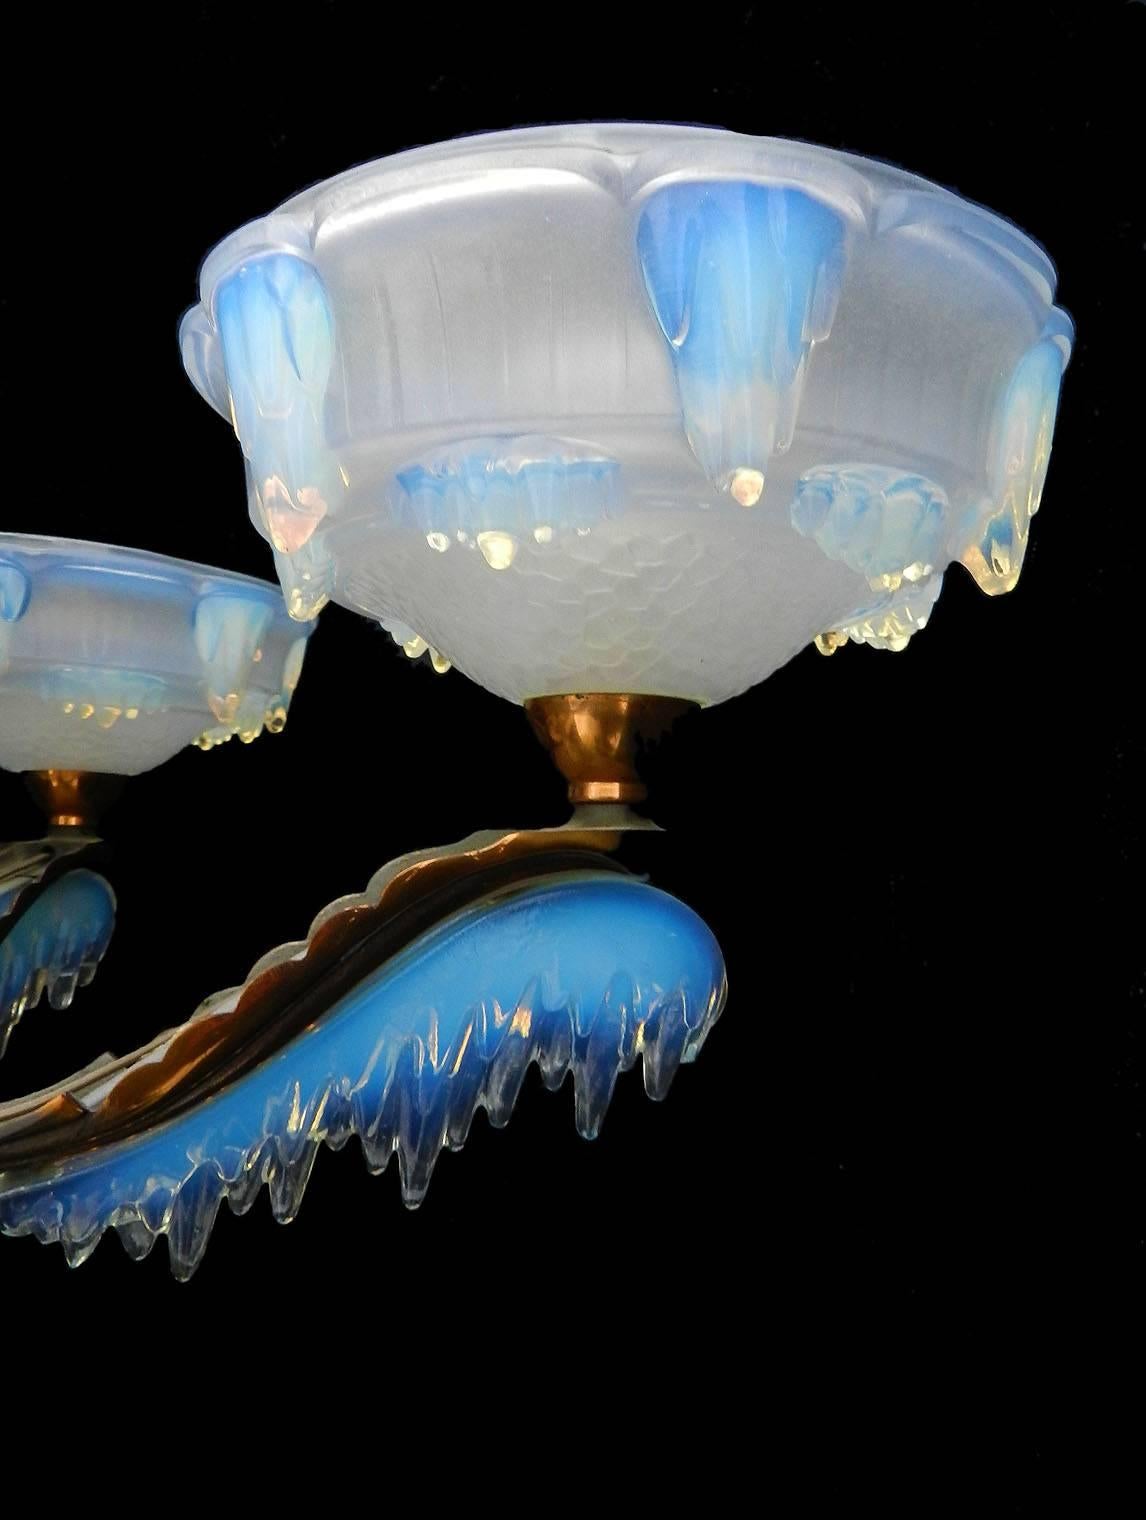 Stunning Art Deco chandelier by Ezan and Petitot
Opalescent glass known as dripping icicles or frozen ice
Glass signed Ezan France
Ezan one of the best French glass makers from the 1930s
Superb original patina to the copper
These will be re-wired